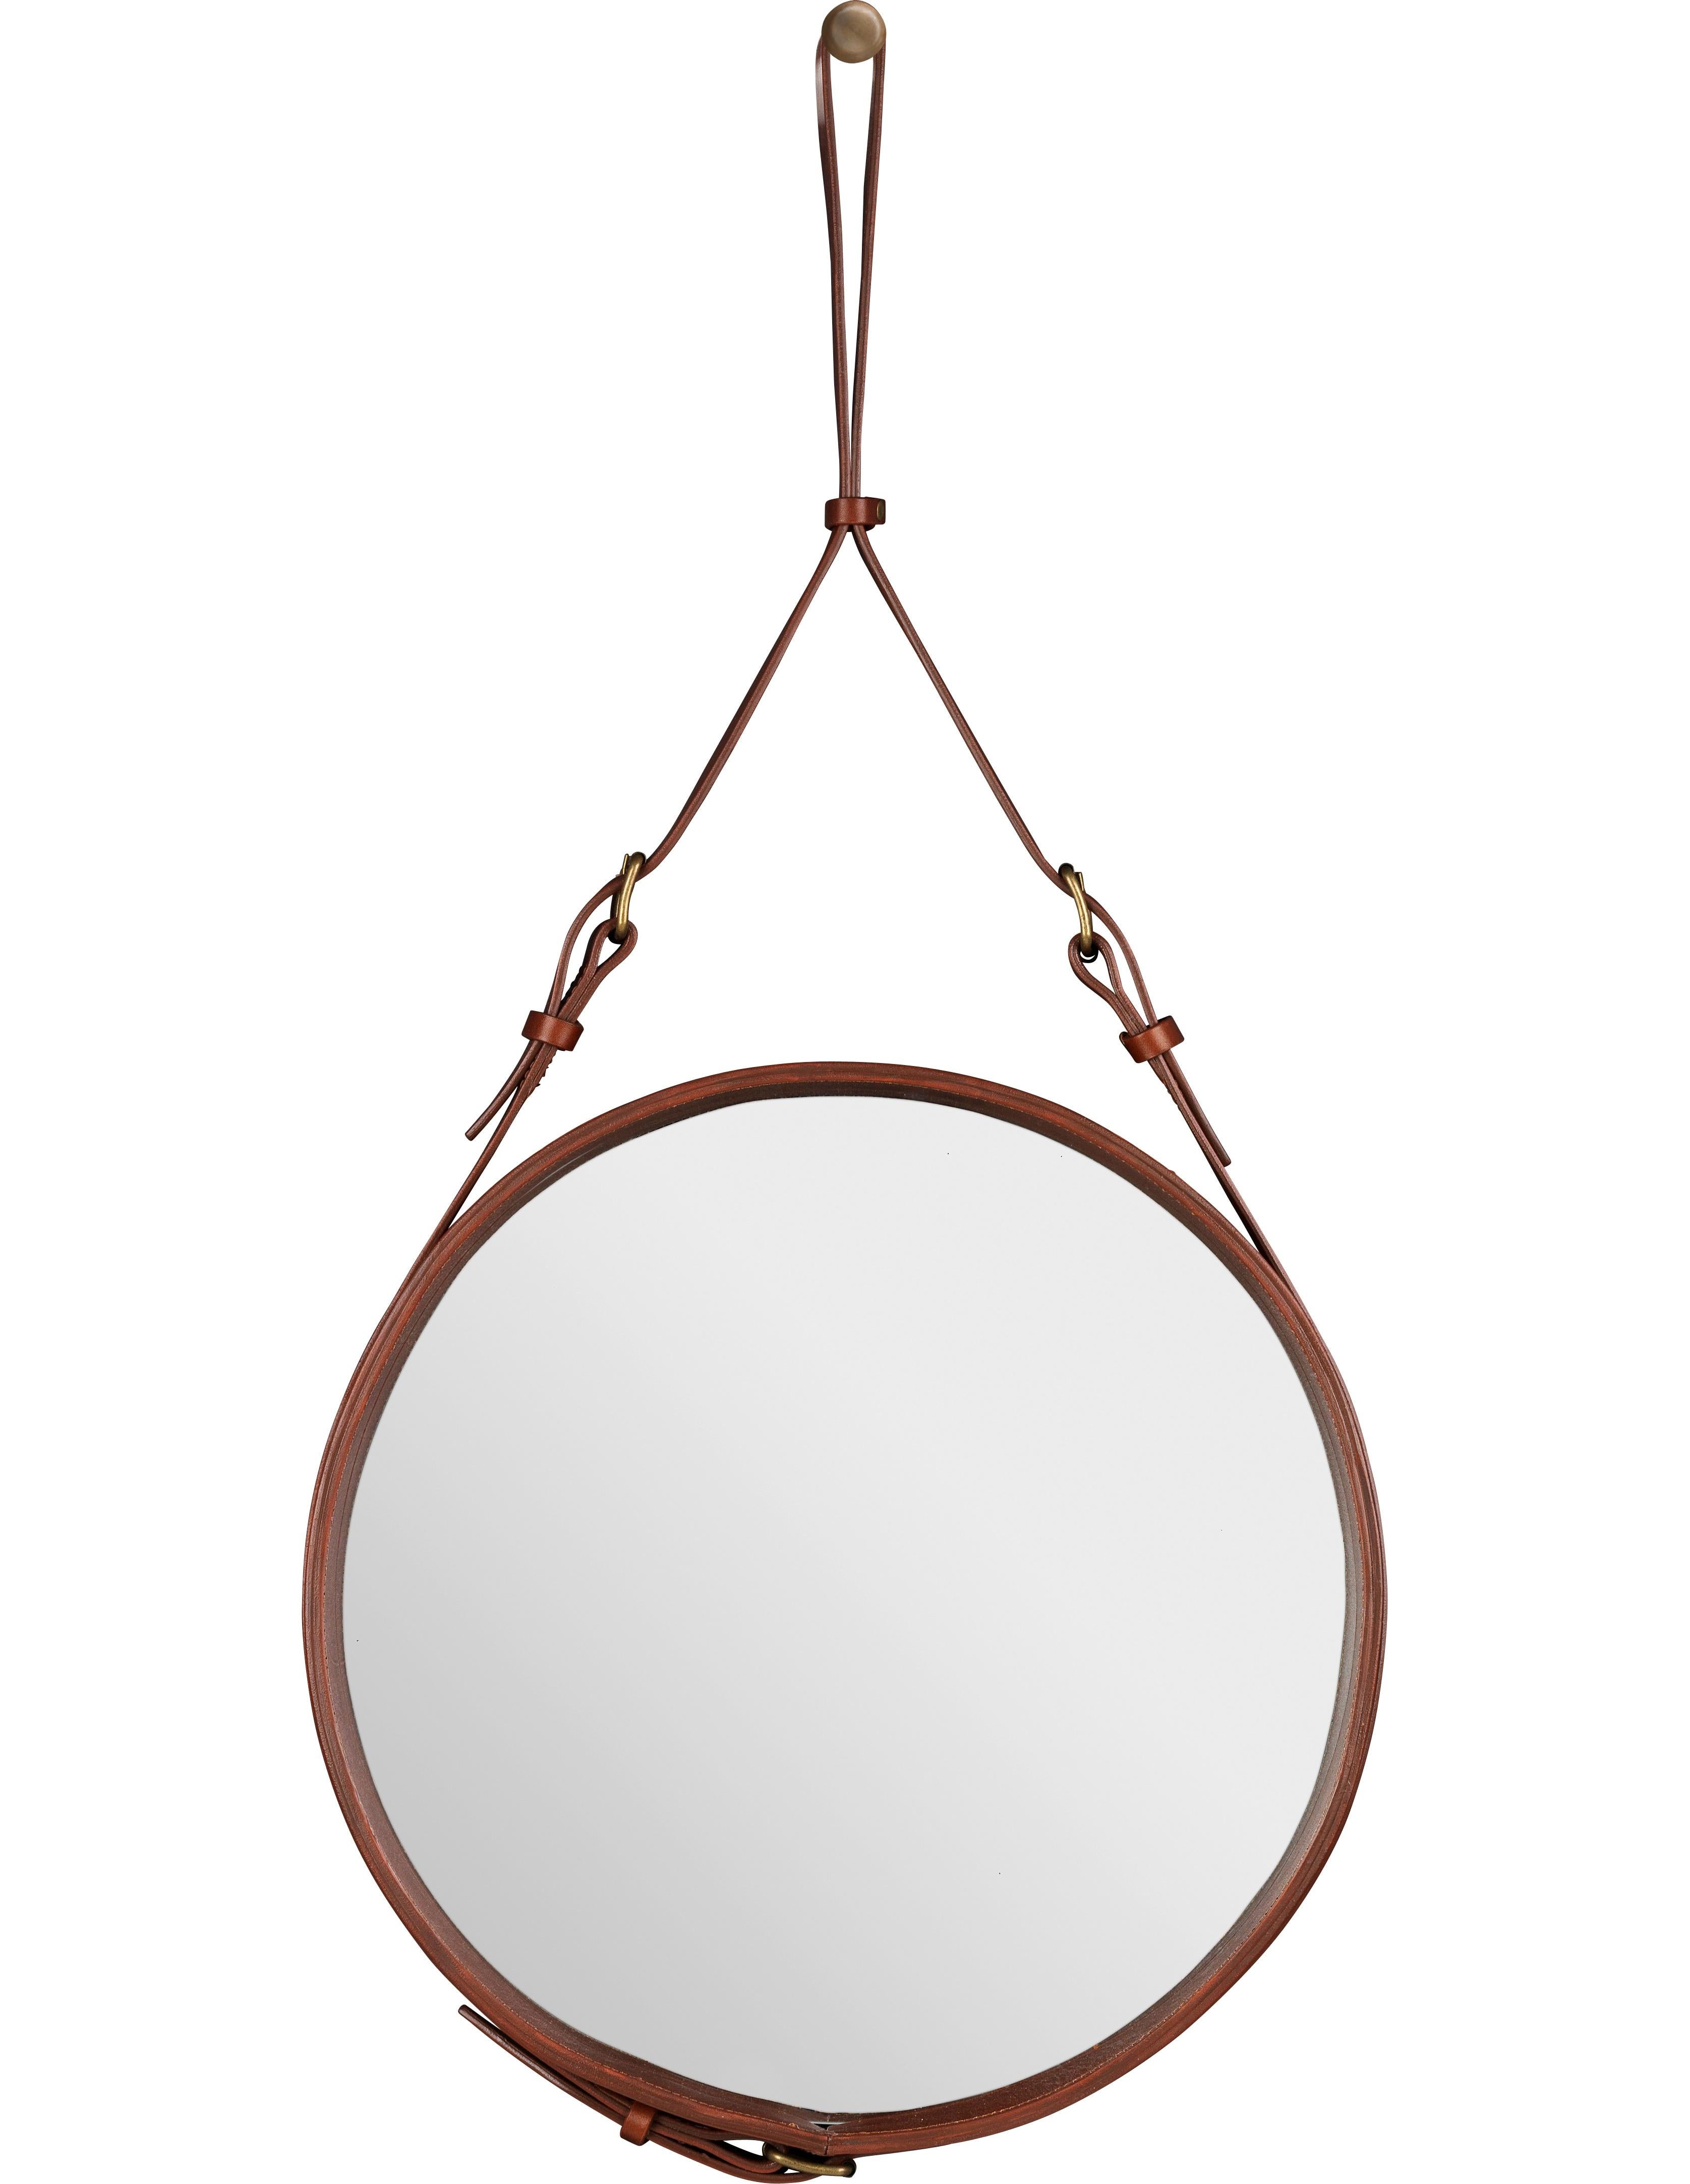 Jacques Adnet small Circulaire mirror with brown leather. Designed in 1950 by Jacques Adnet and executed in leather, brass, and glass. The Circulaire mirror was the result of a partnership Adnet formed with the exclusive French fashion house Hermès,